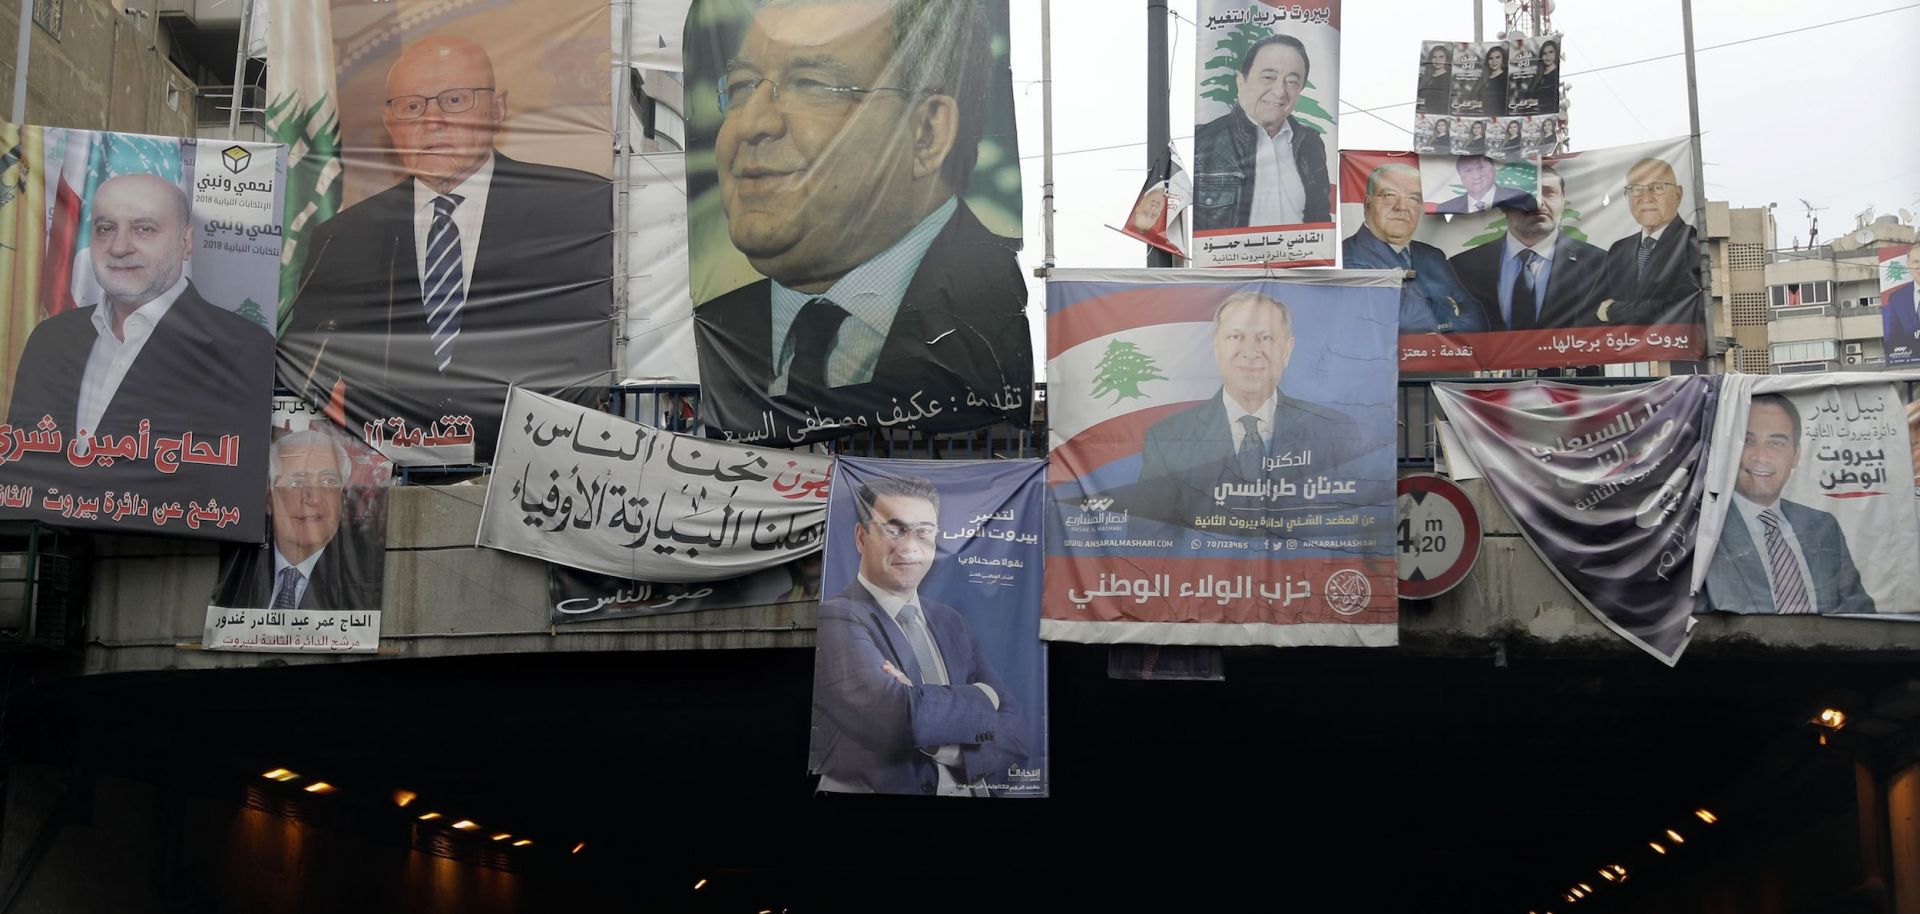 Campaign posters slung from a tunnel entrance in Beirut depict candidates in Lebanon's parliamentary election, which took place May 6.